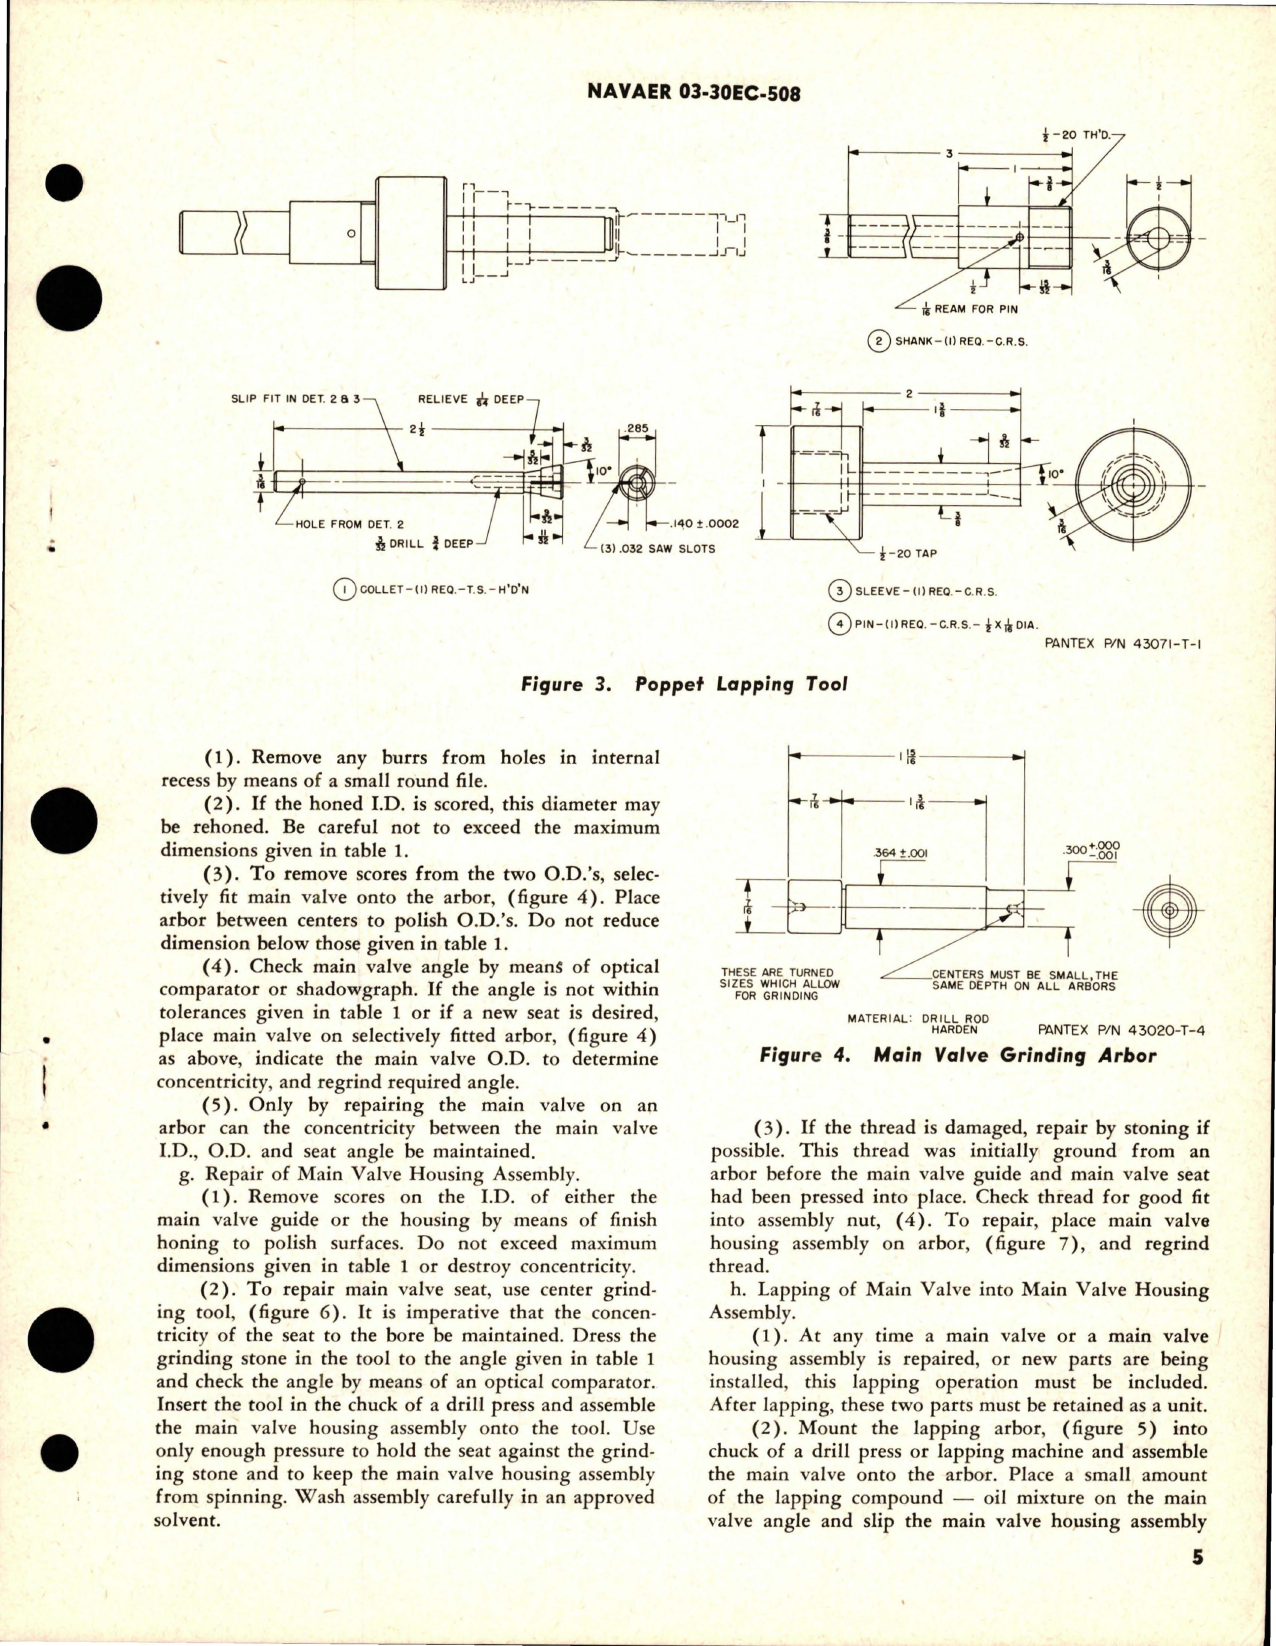 Sample page 5 from AirCorps Library document: Overhaul Instructions with Parts Breakdown for Hydraulic Pressure Relief Valve - AA-12-07